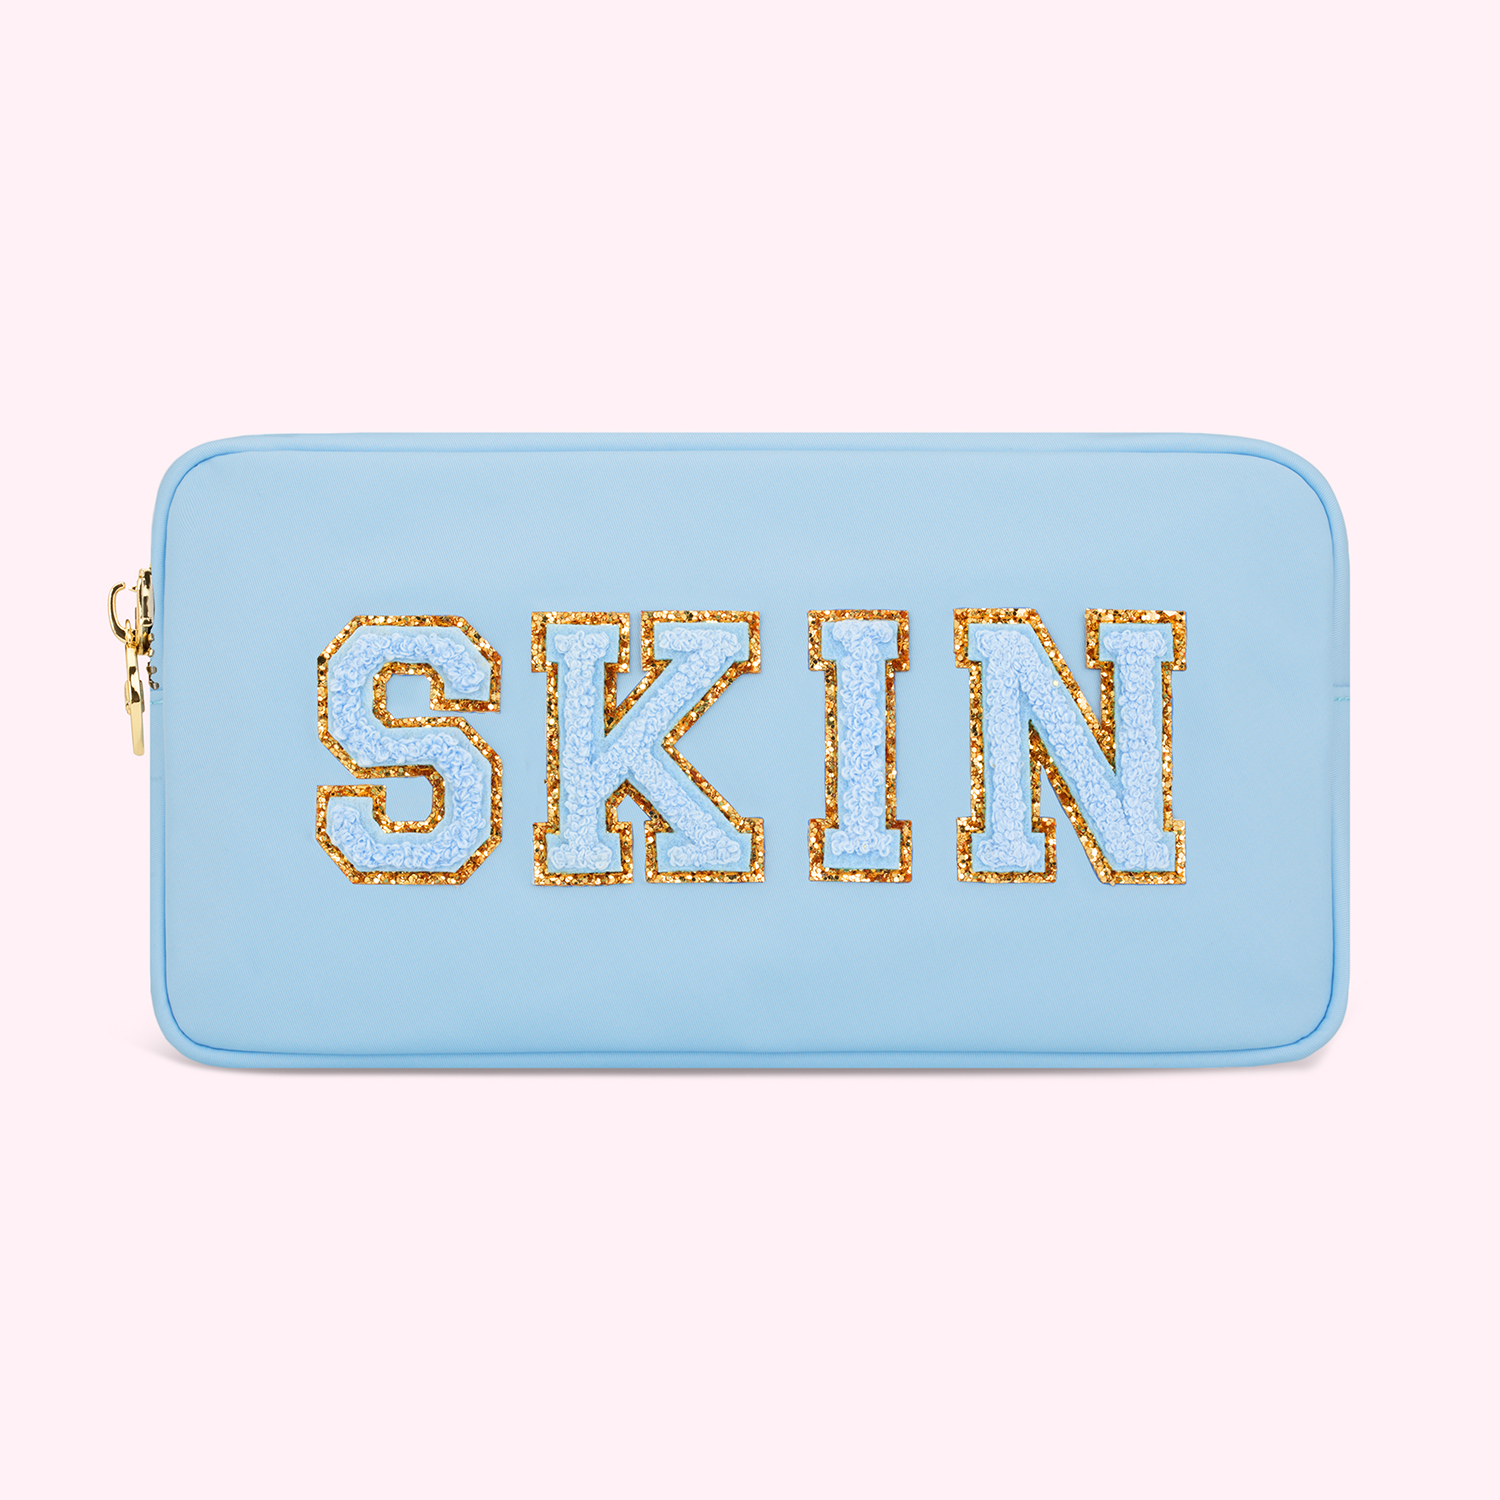 Stoney Clover Lane Skin Small Pouch - Periwinkle